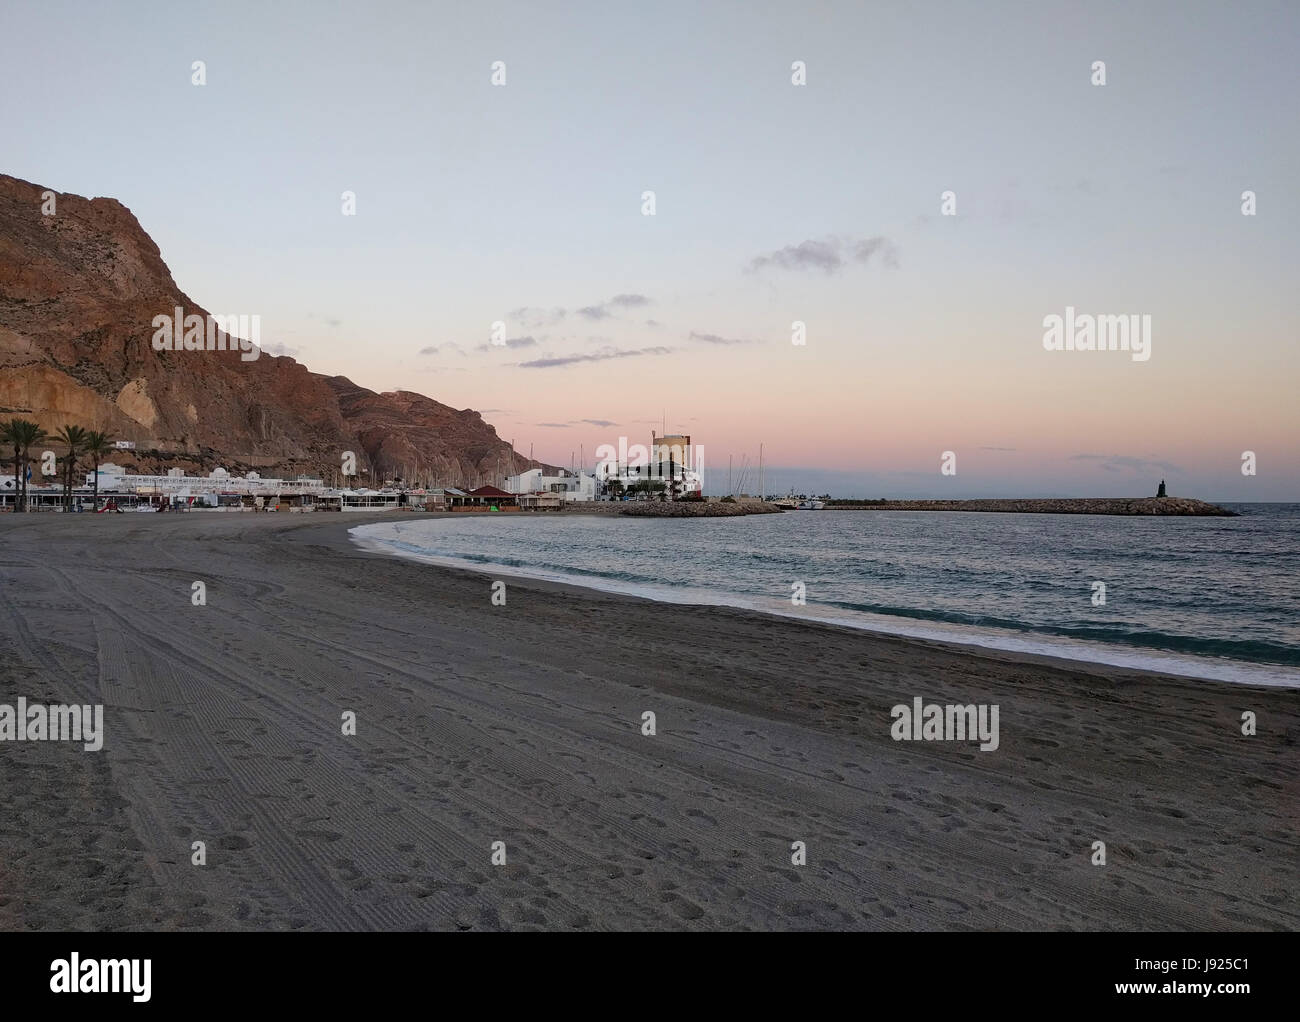 Aguadulce beach at sunset. Aguadulce is a spanish locality of Roquetas de Mar, province of Almeria. Spain Stock Photo